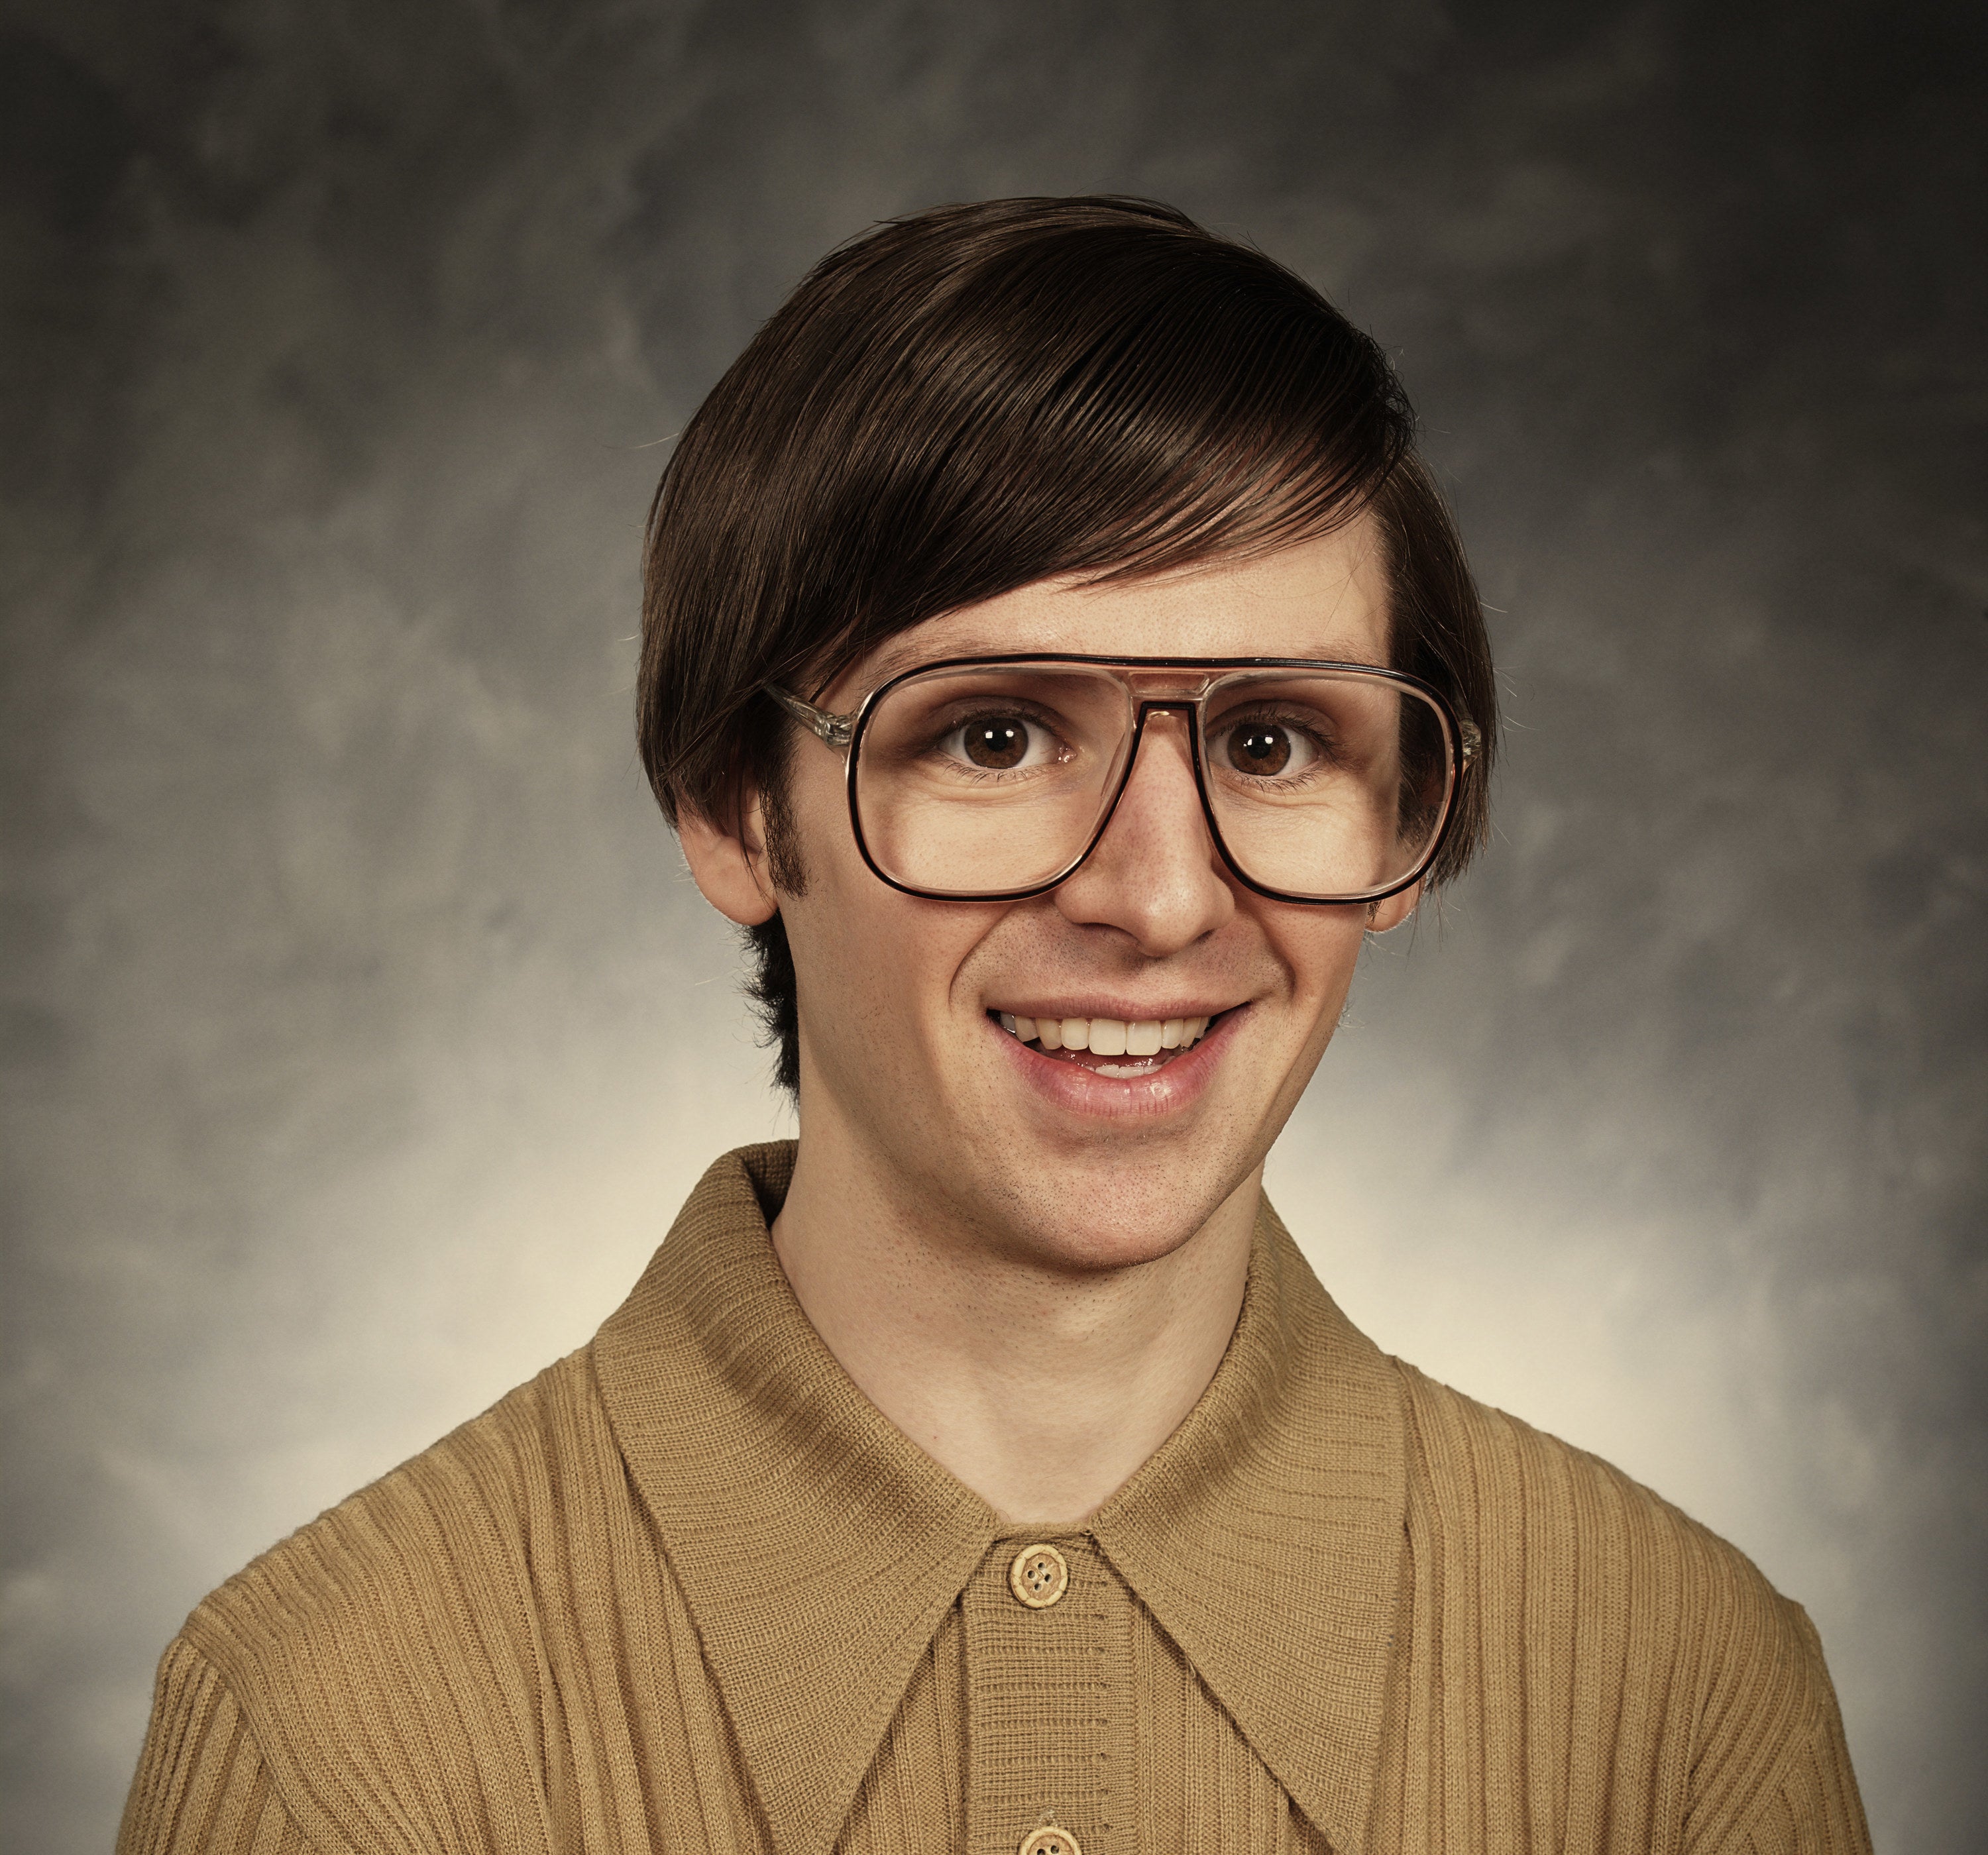 yearbook picture with retro glasses